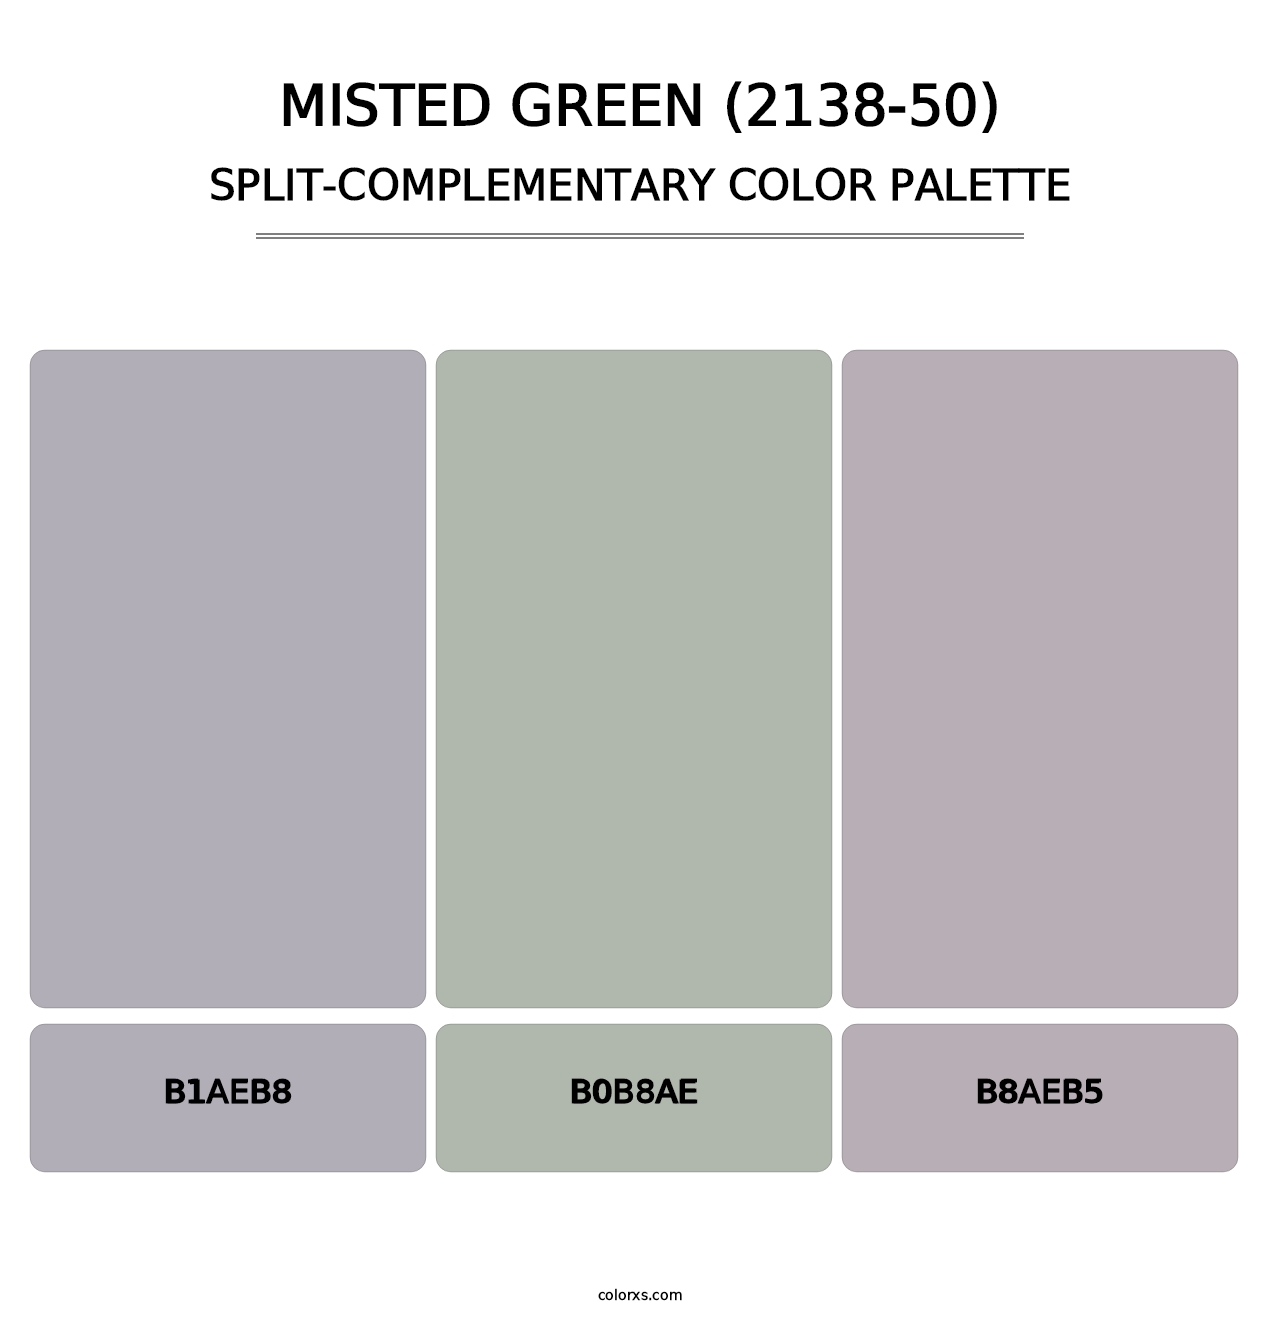 Misted Green (2138-50) - Split-Complementary Color Palette